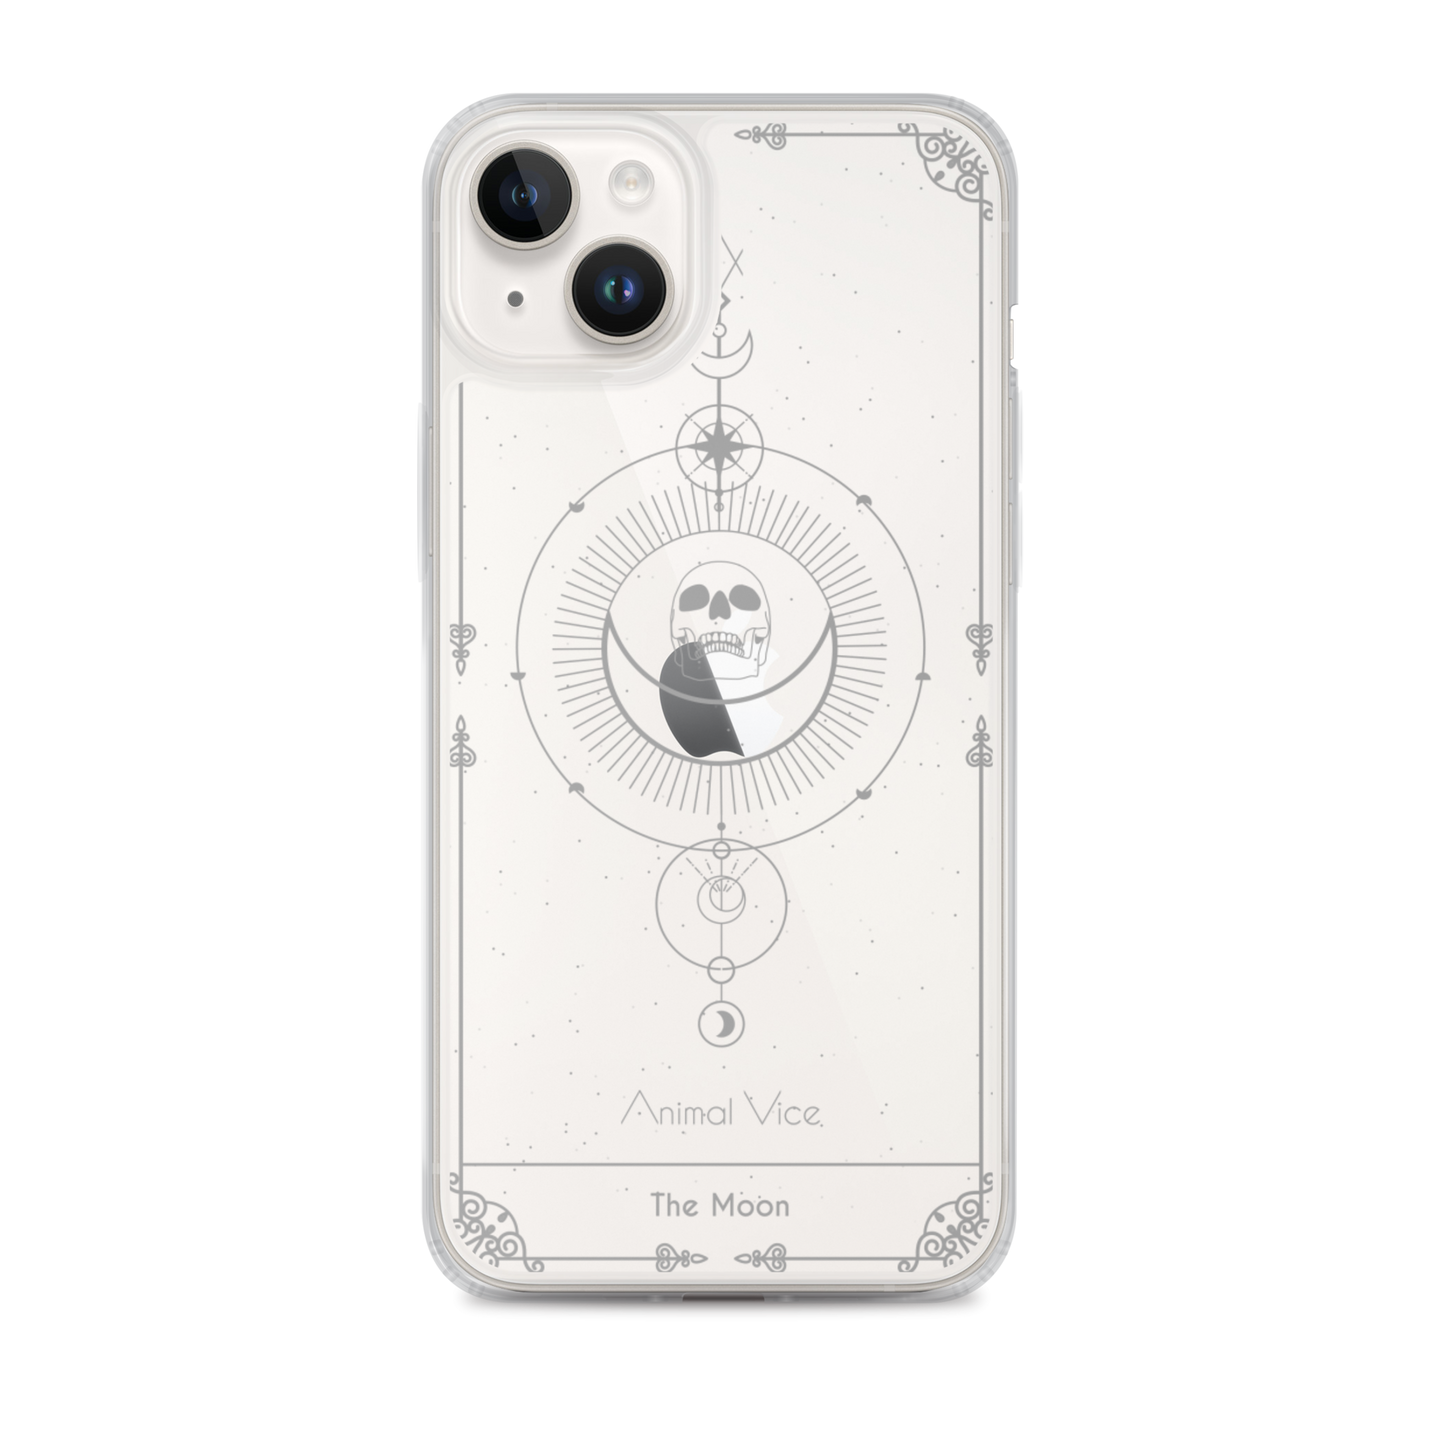 The Moon iPhone Case